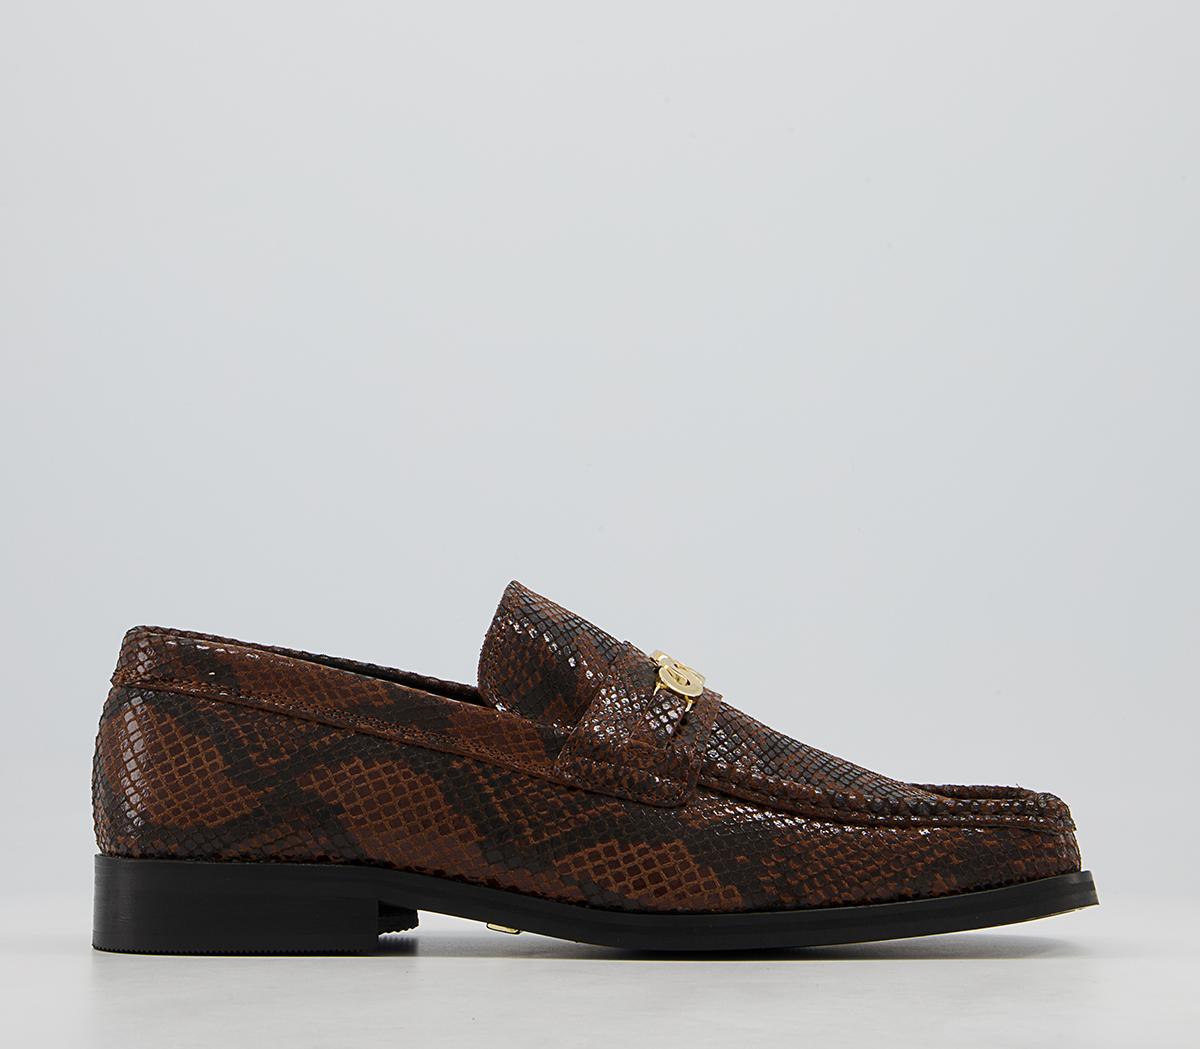 OfficeMarlin Square Toe Chain LoafersBrown Snake